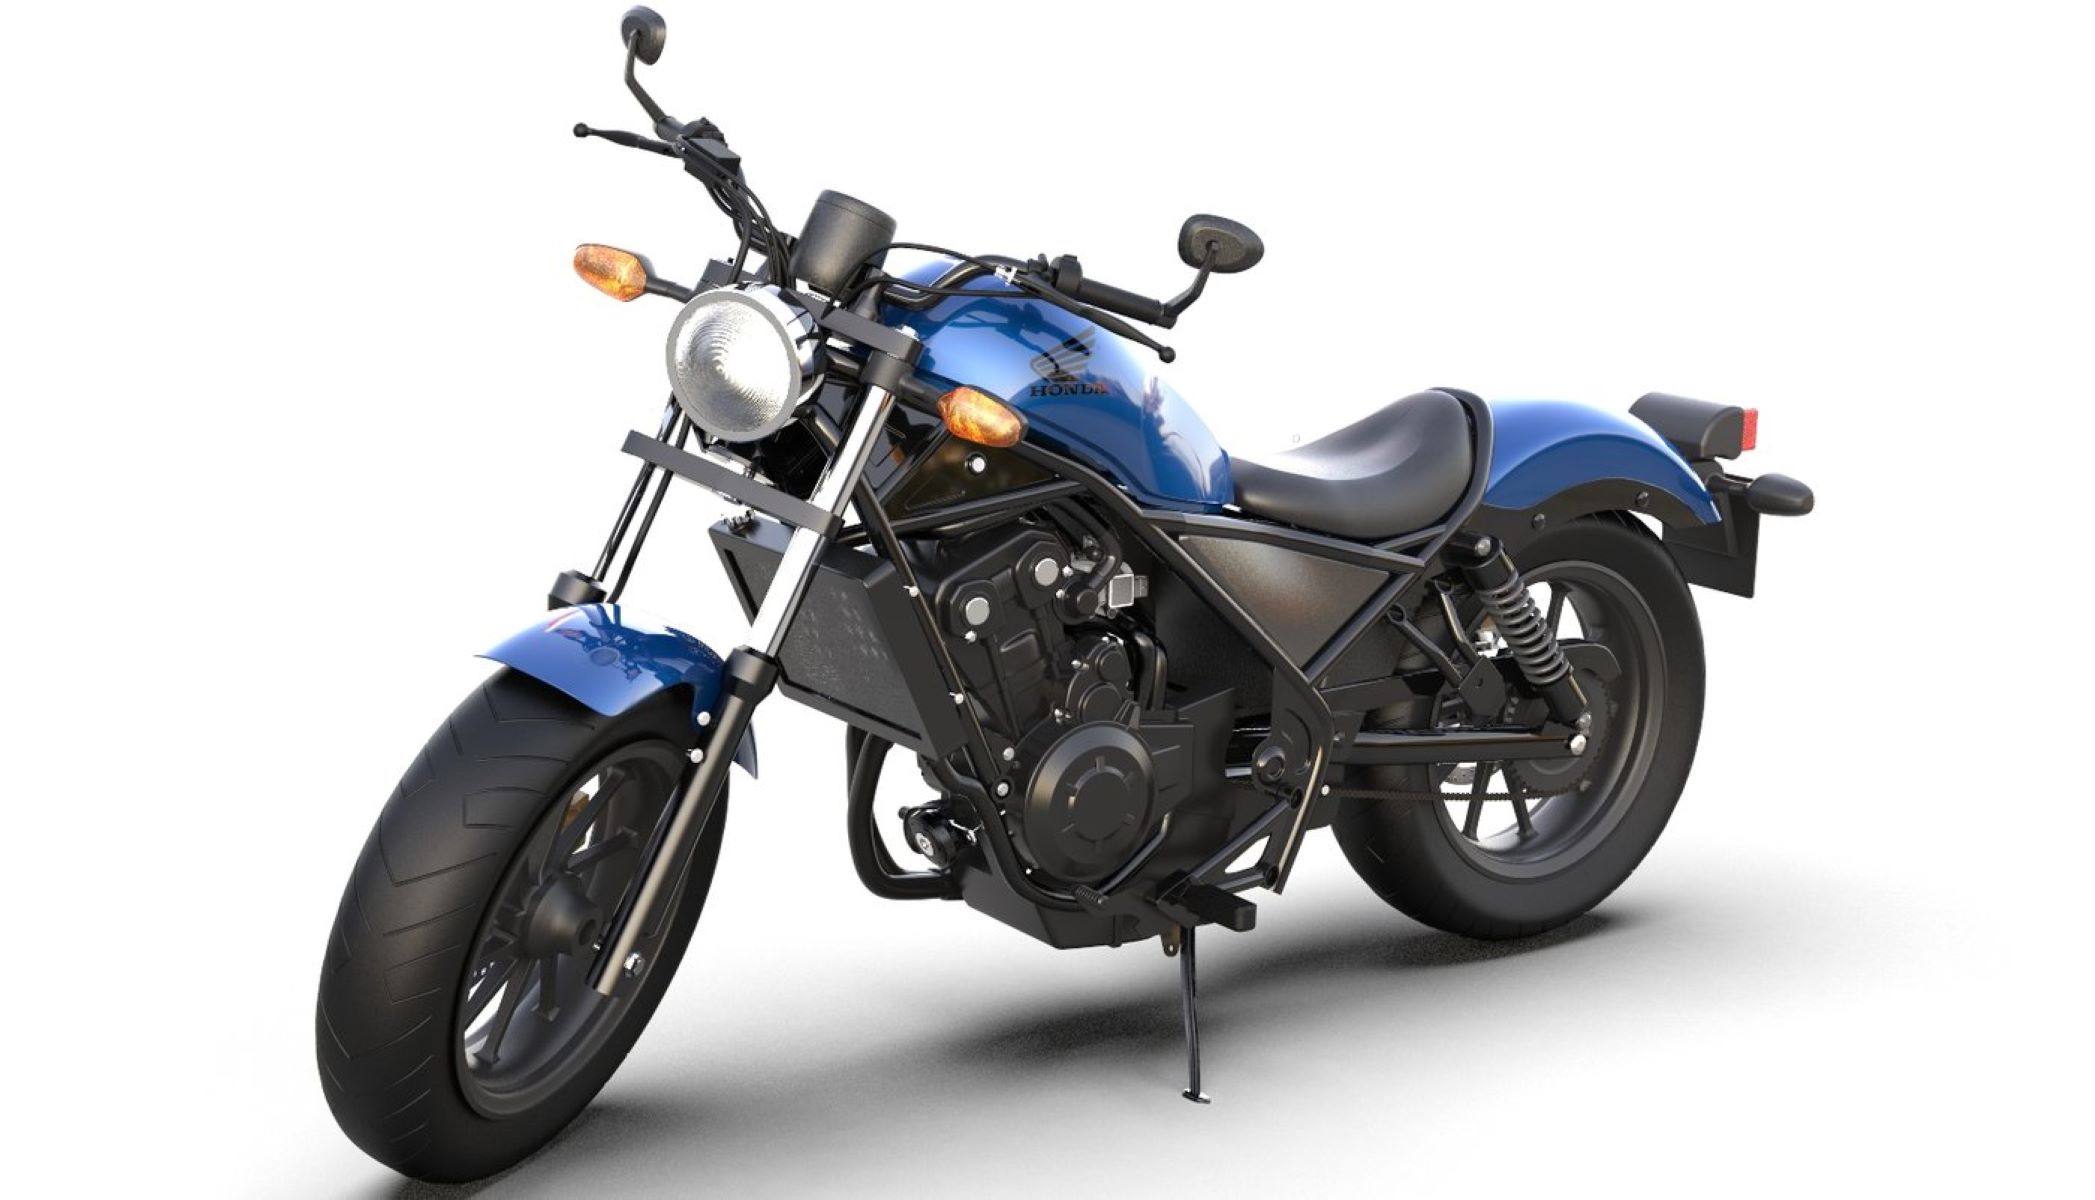 20 Intriguing Facts About Honda Rebel 500 - Facts.net